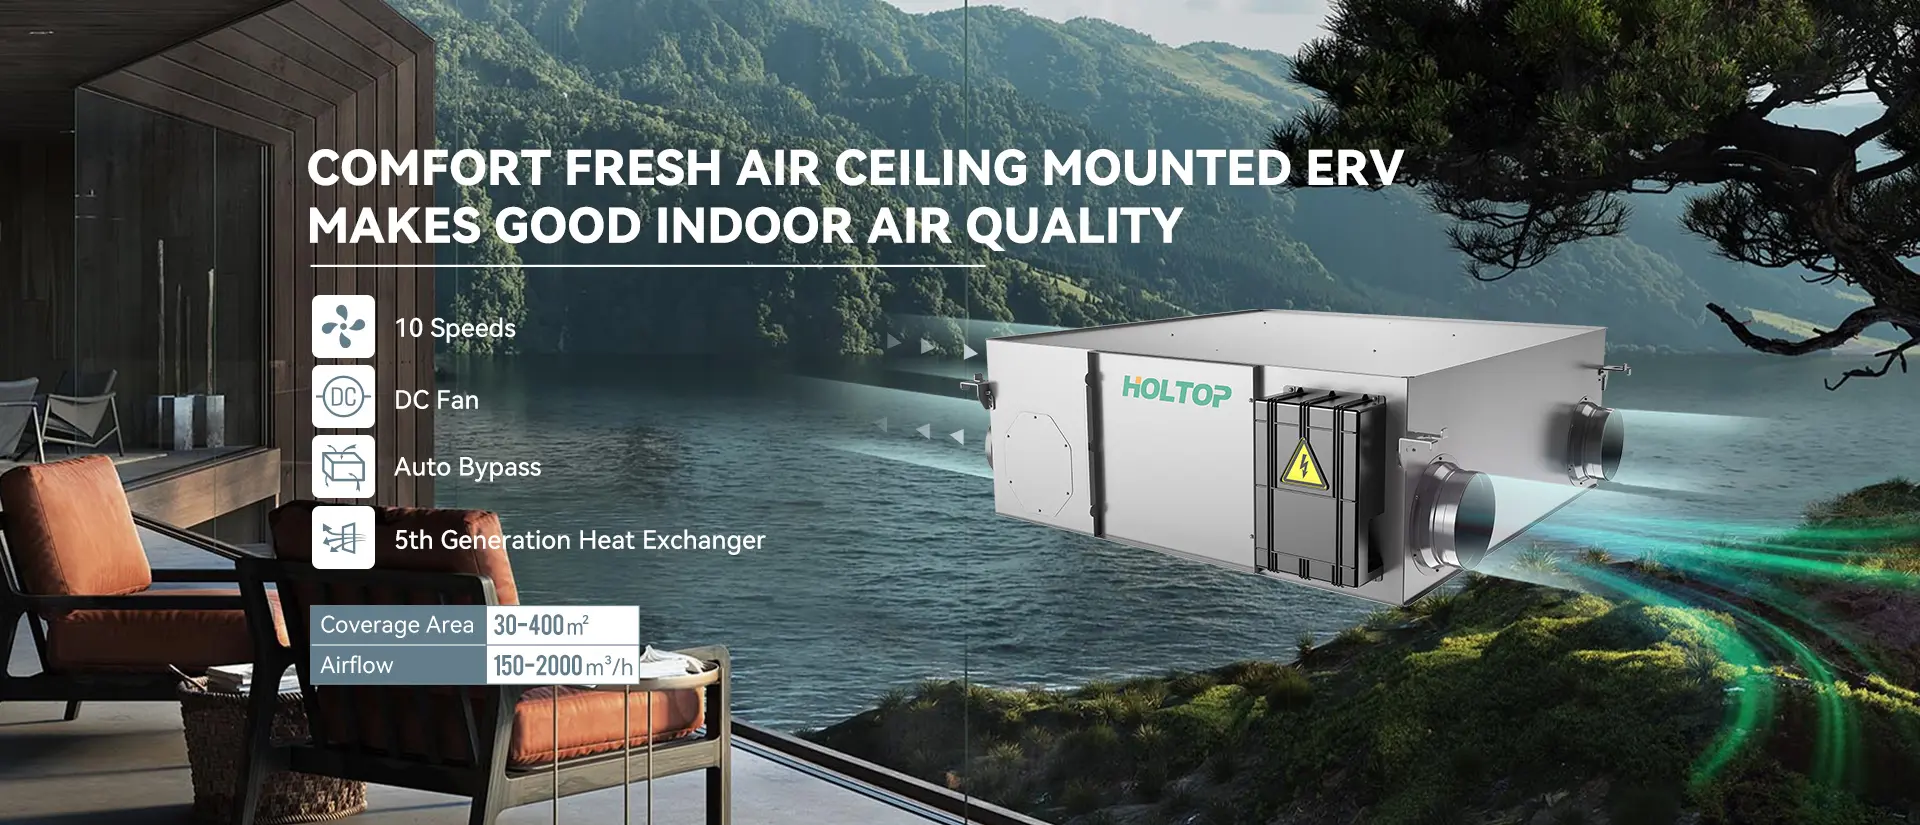 Holtop_comfort_fresh_air_ceiling_suspended_energy_recovery_ventilator_air_heat_recuperator_ERVs_MVHRs